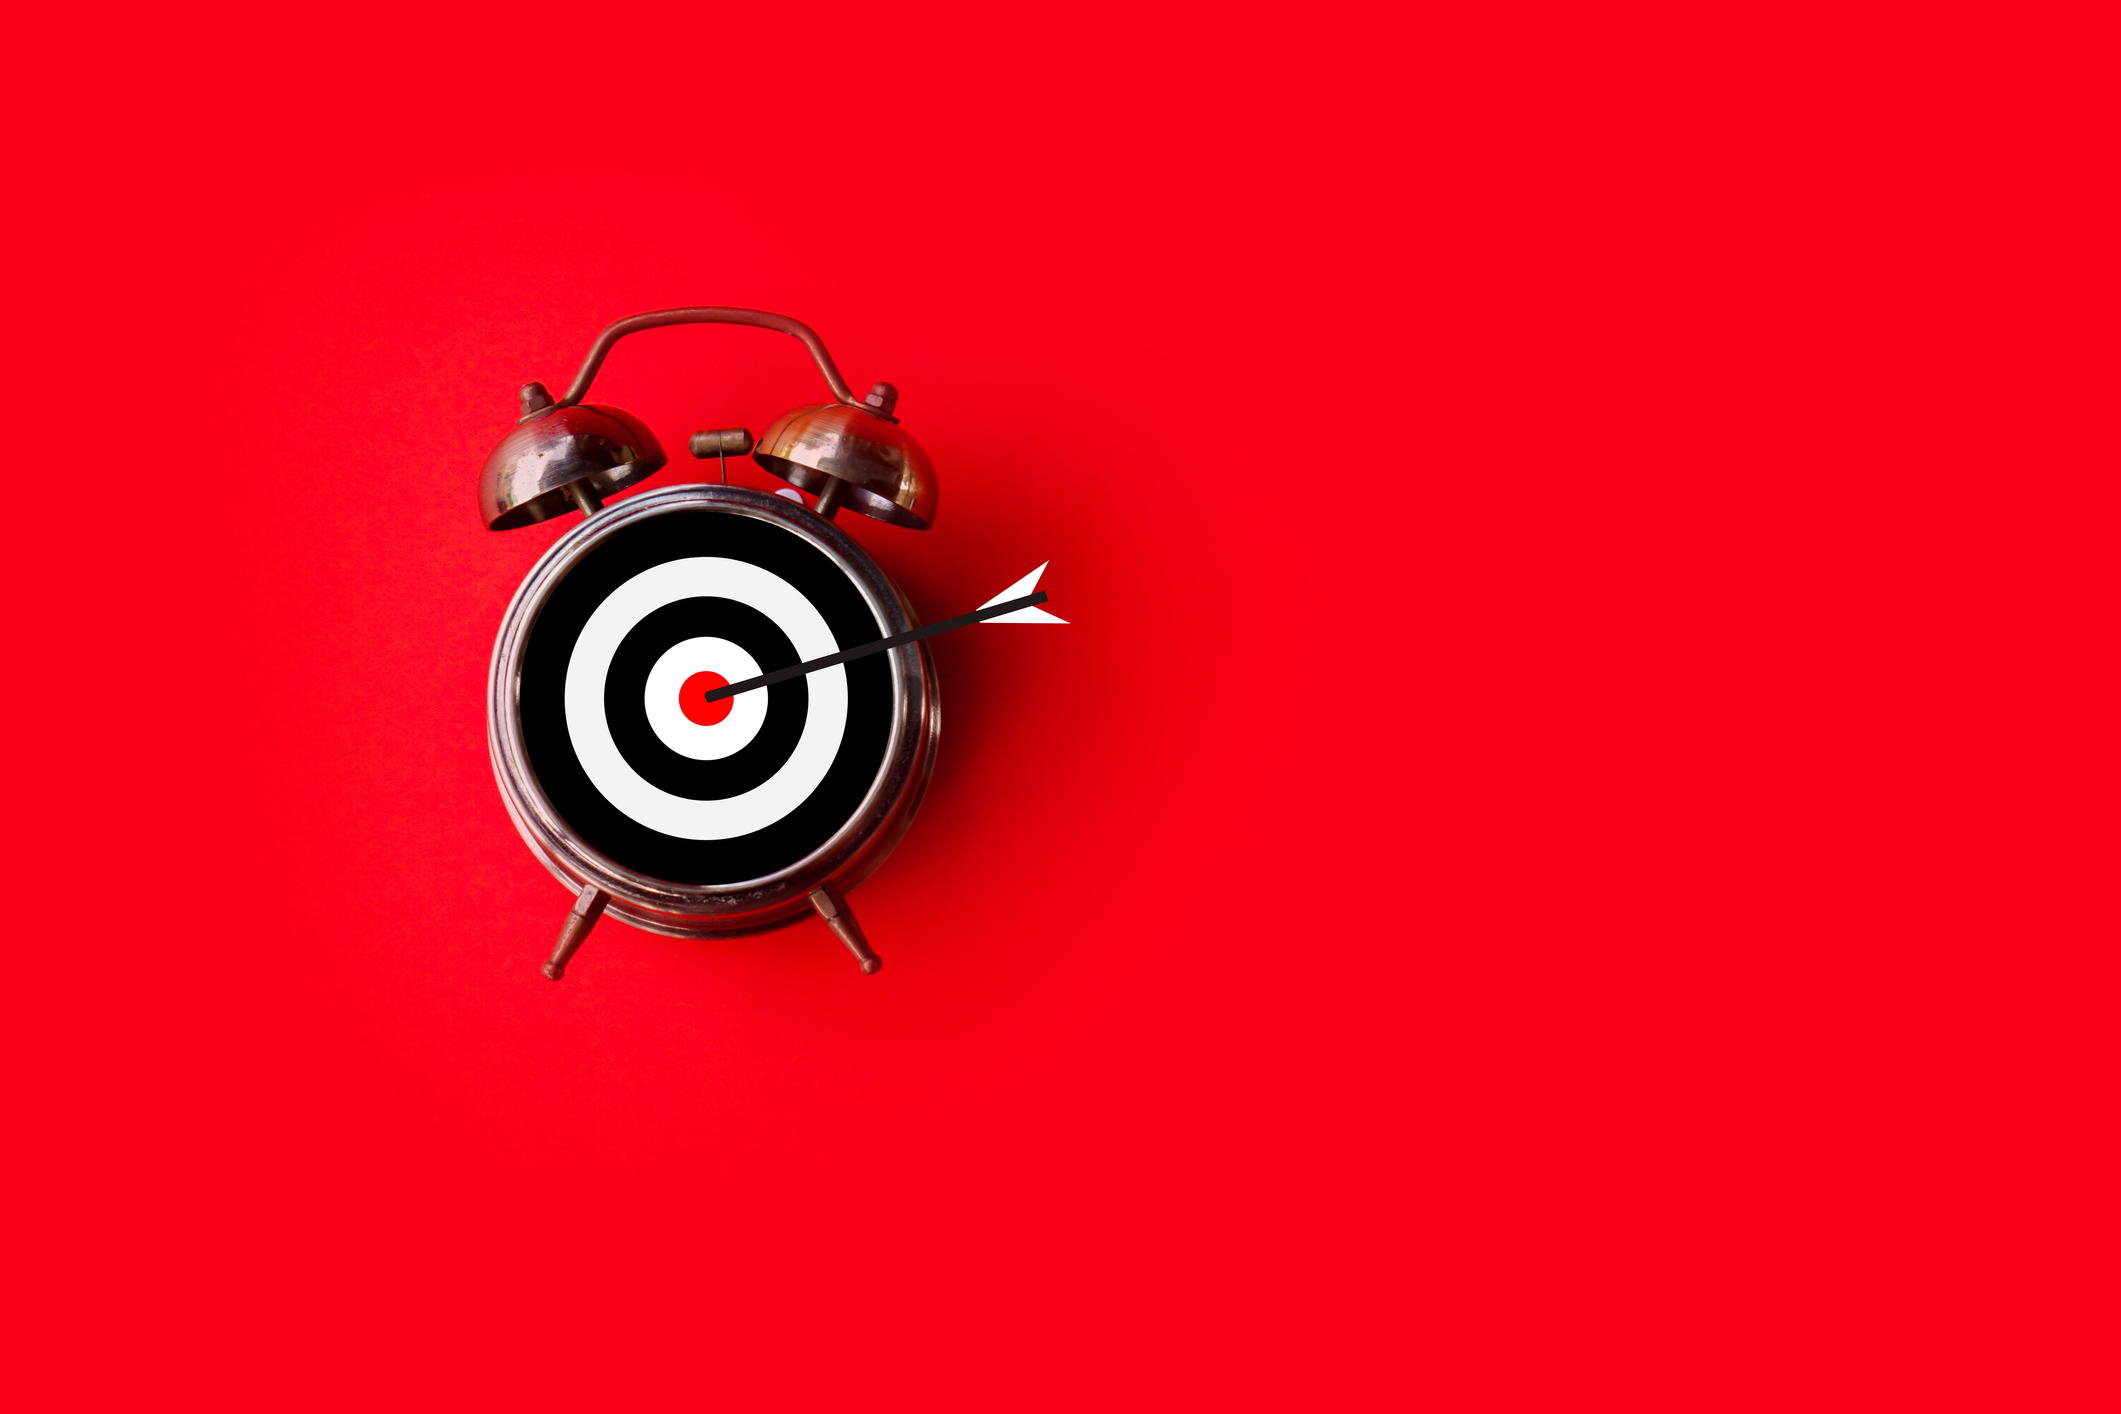 Target time, goal symbol on clock face on red background